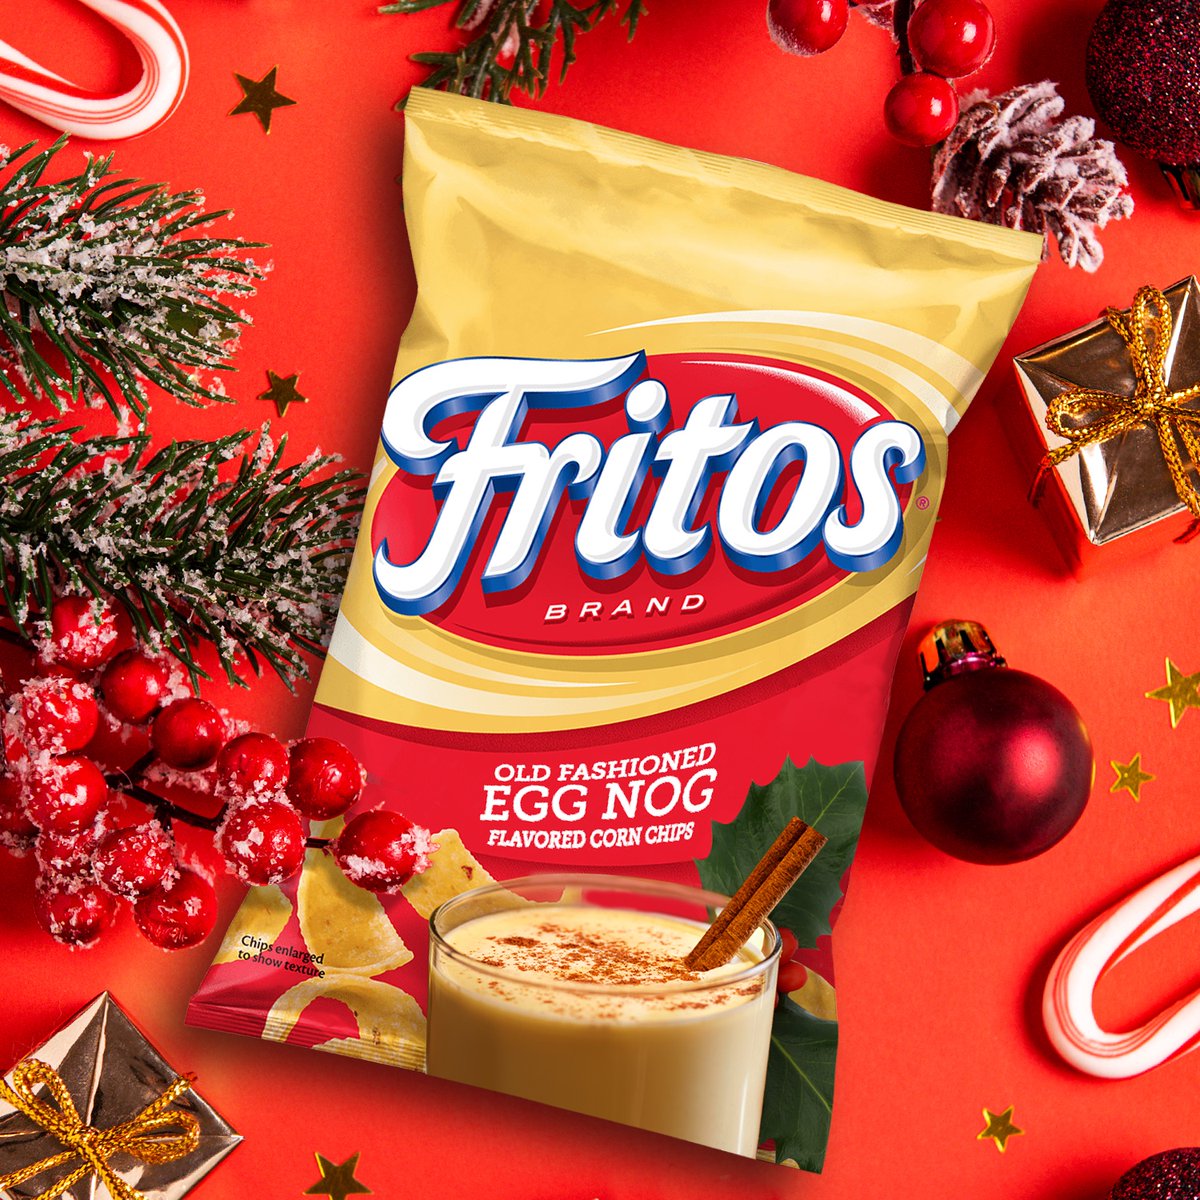 Tis the season to be noggin'. Would you add this #fakeflavor to your holiday festivities?